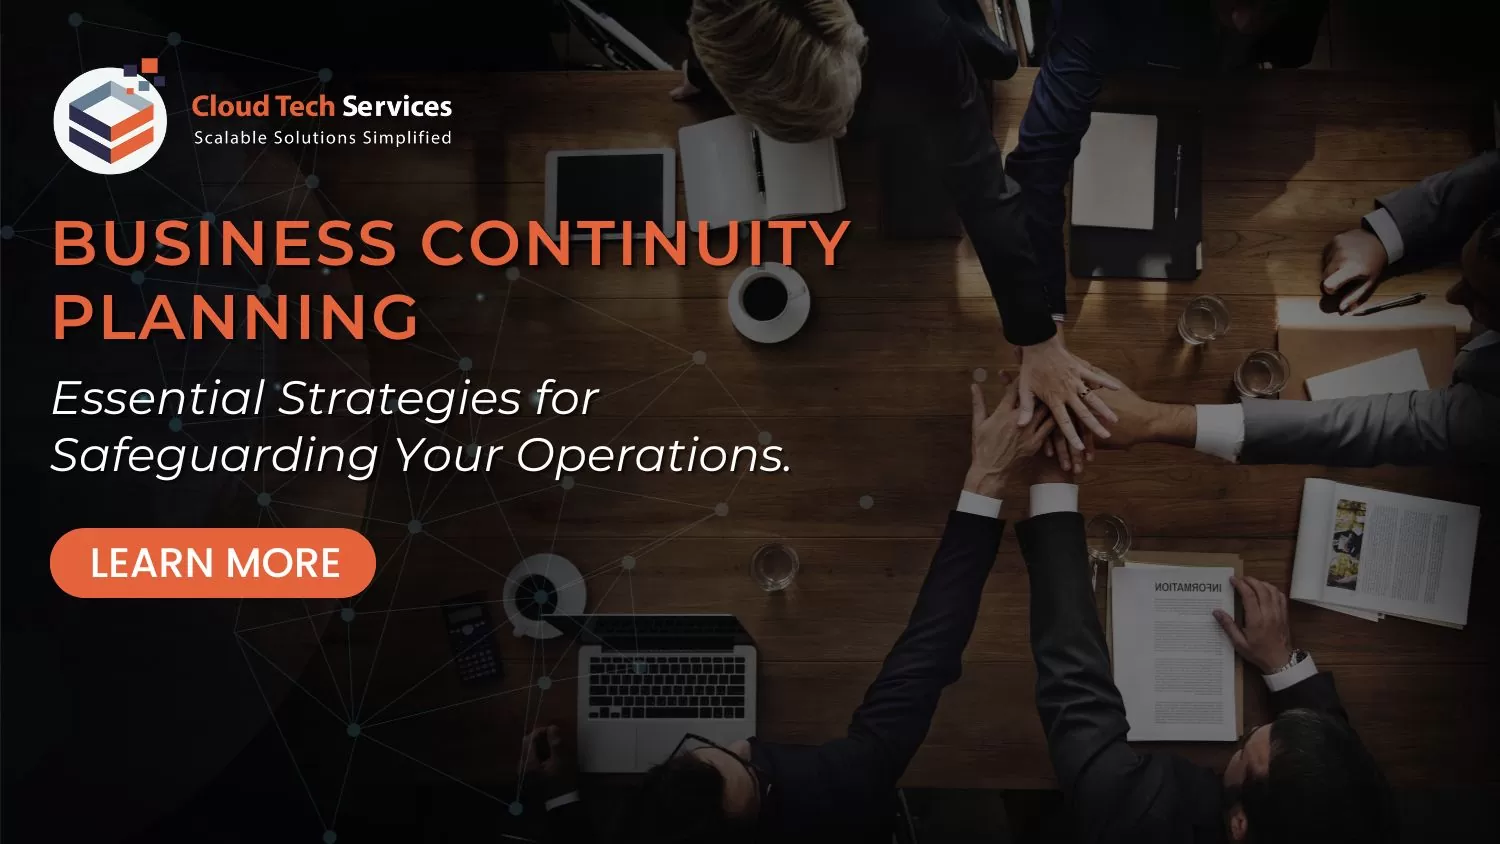 Business Continuity Planning Essential Strategies for Safeguarding Your Operations.